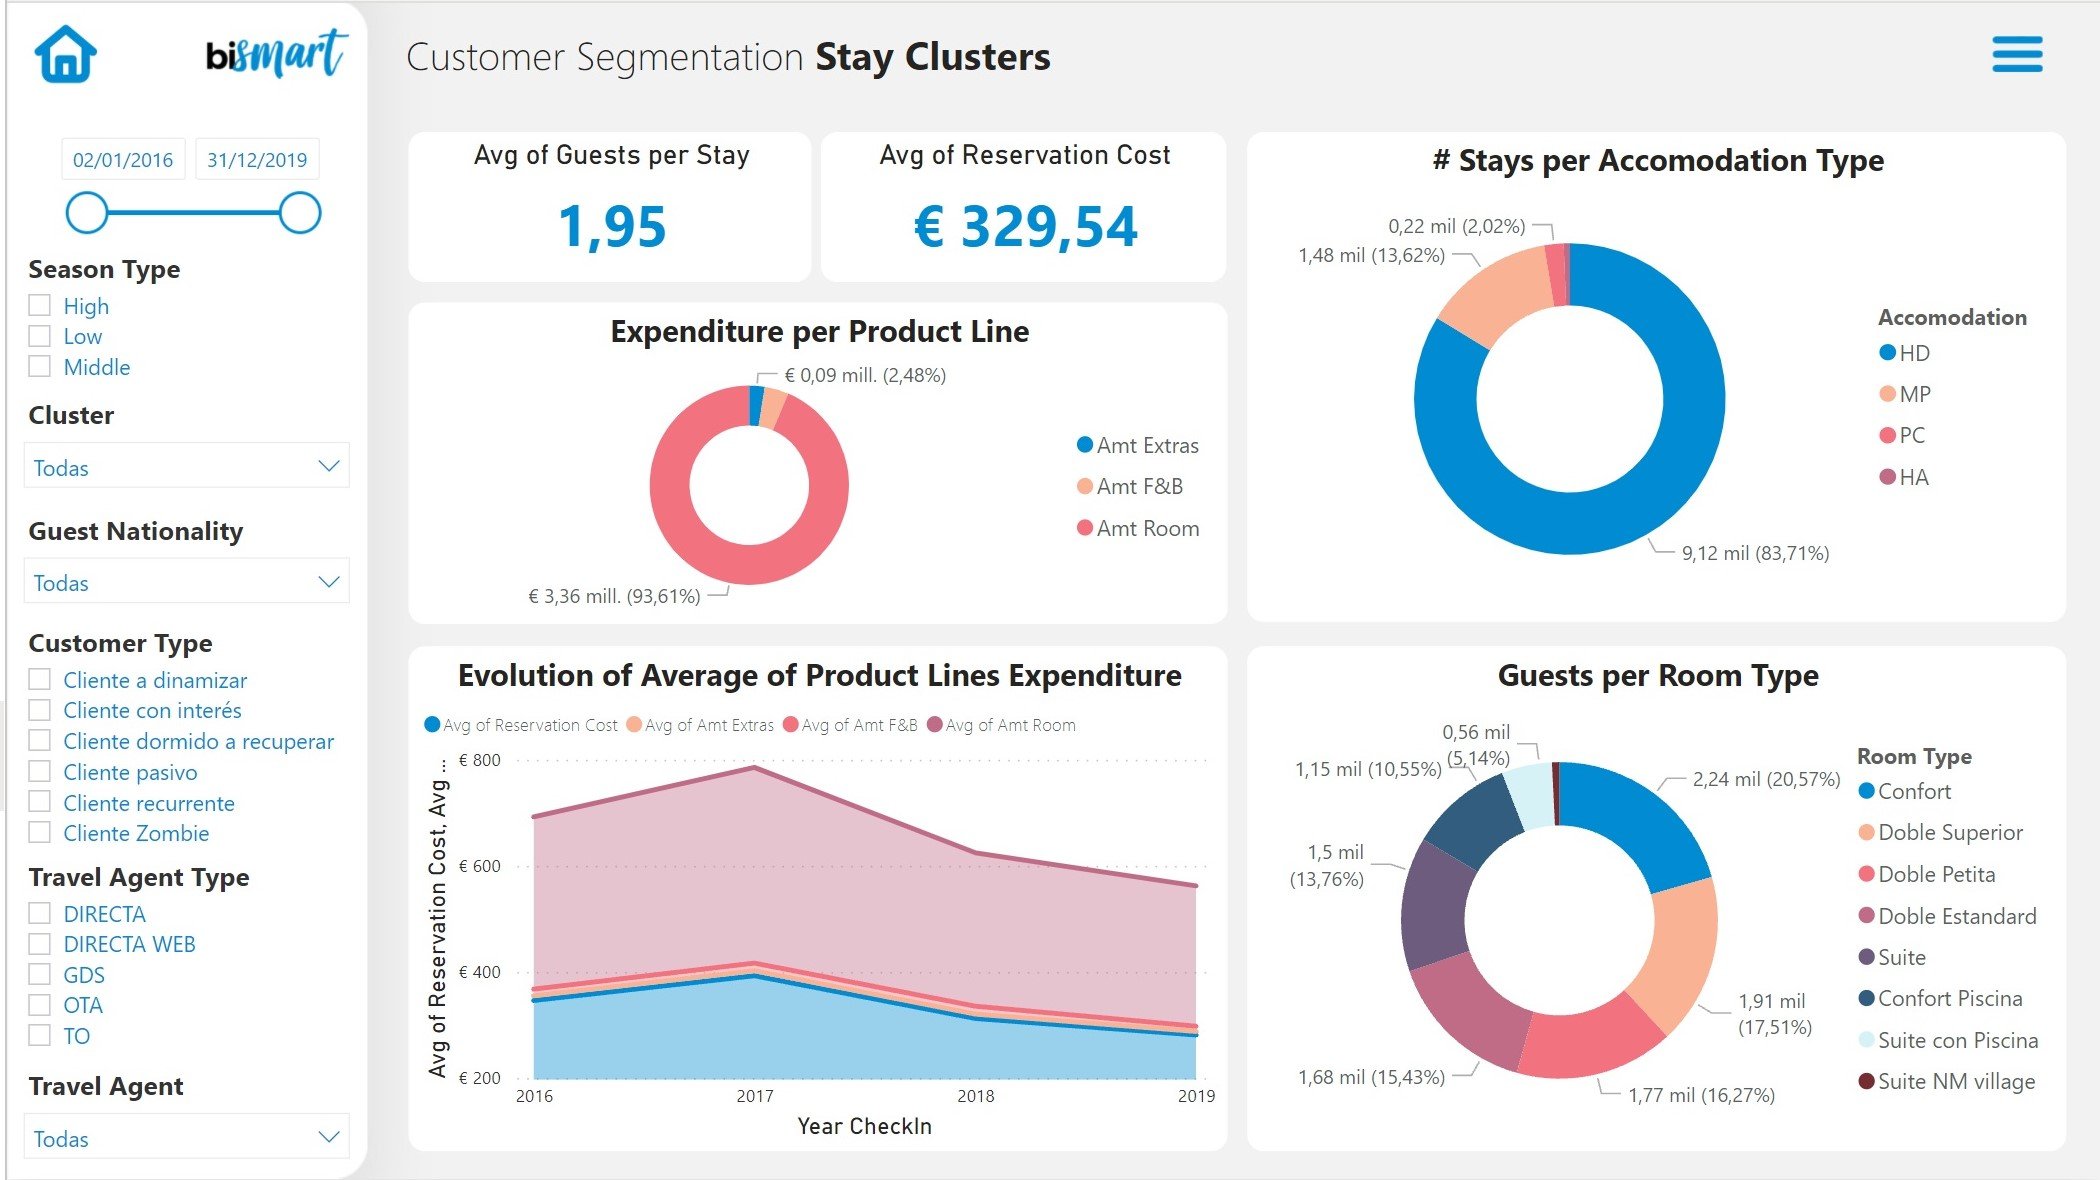 How to Create an Executive Dashboard in 6 Easy Steps?